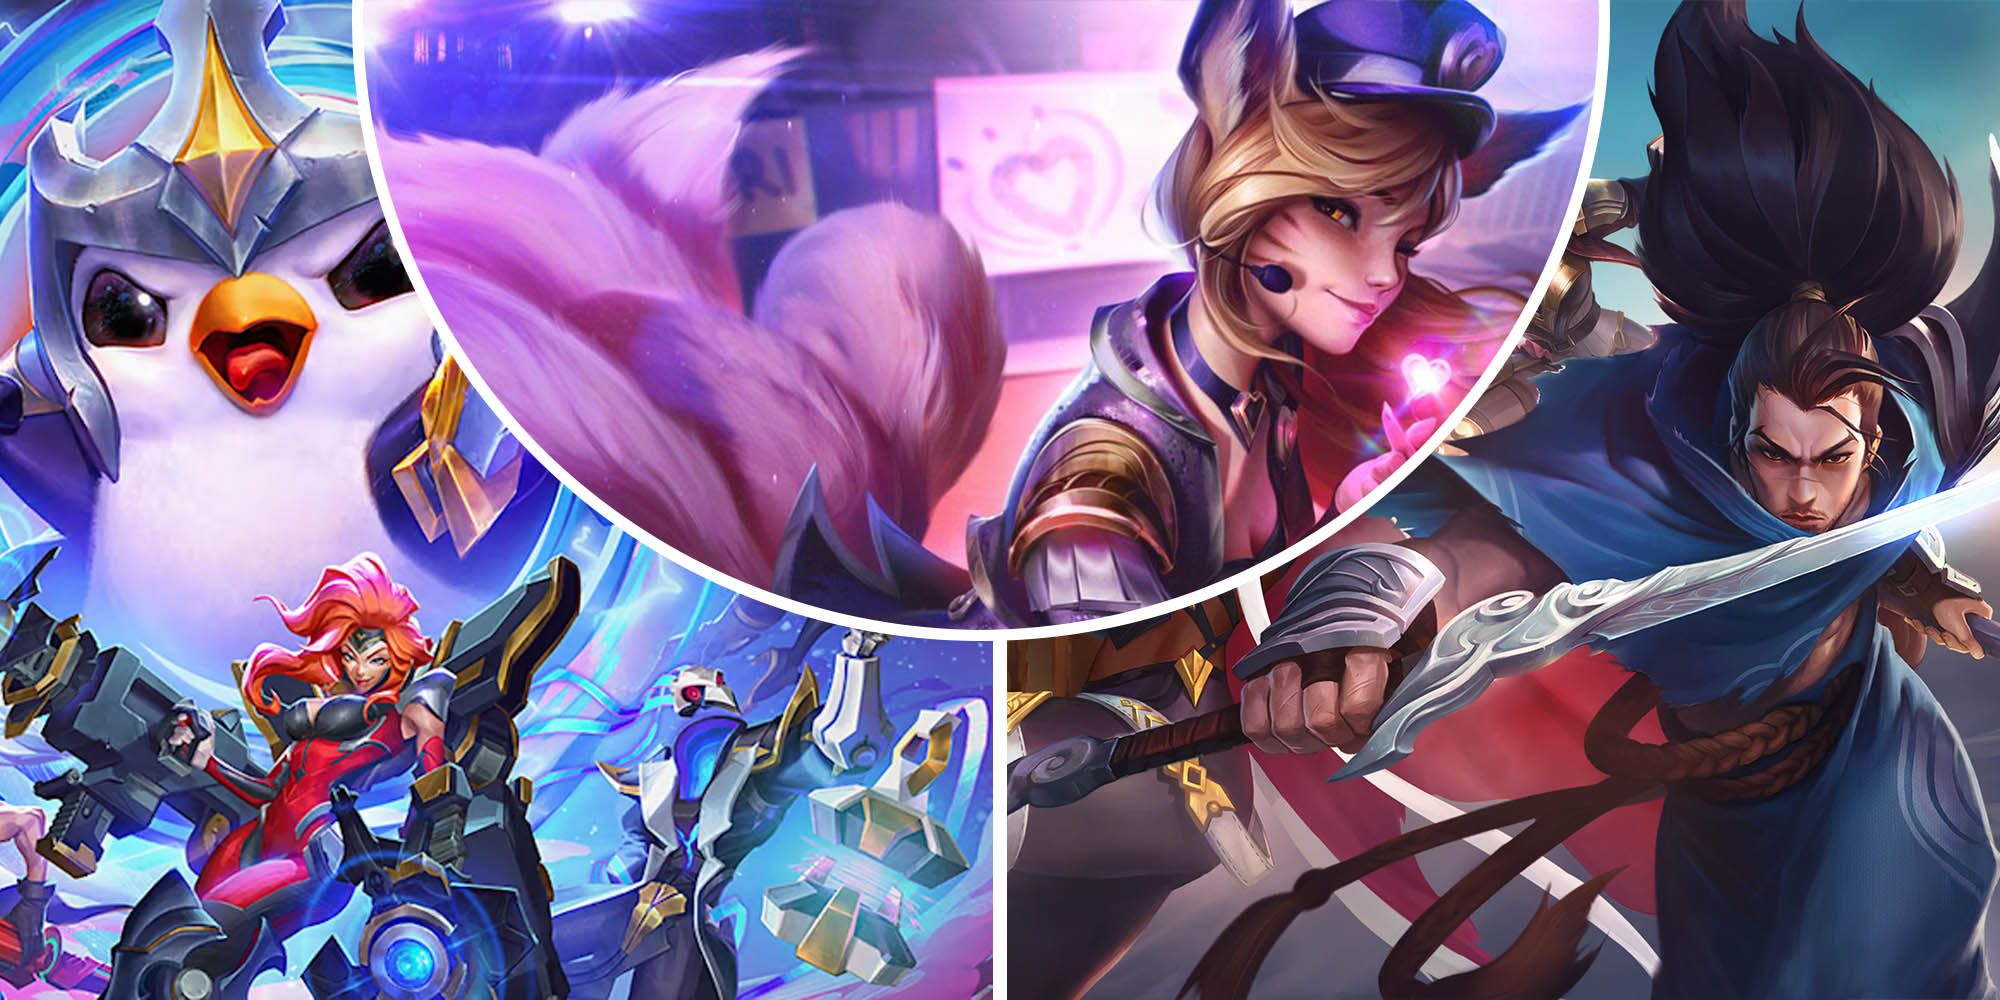 Ahri of the League of Legends winks and thrusts Yasuo forward with his sword